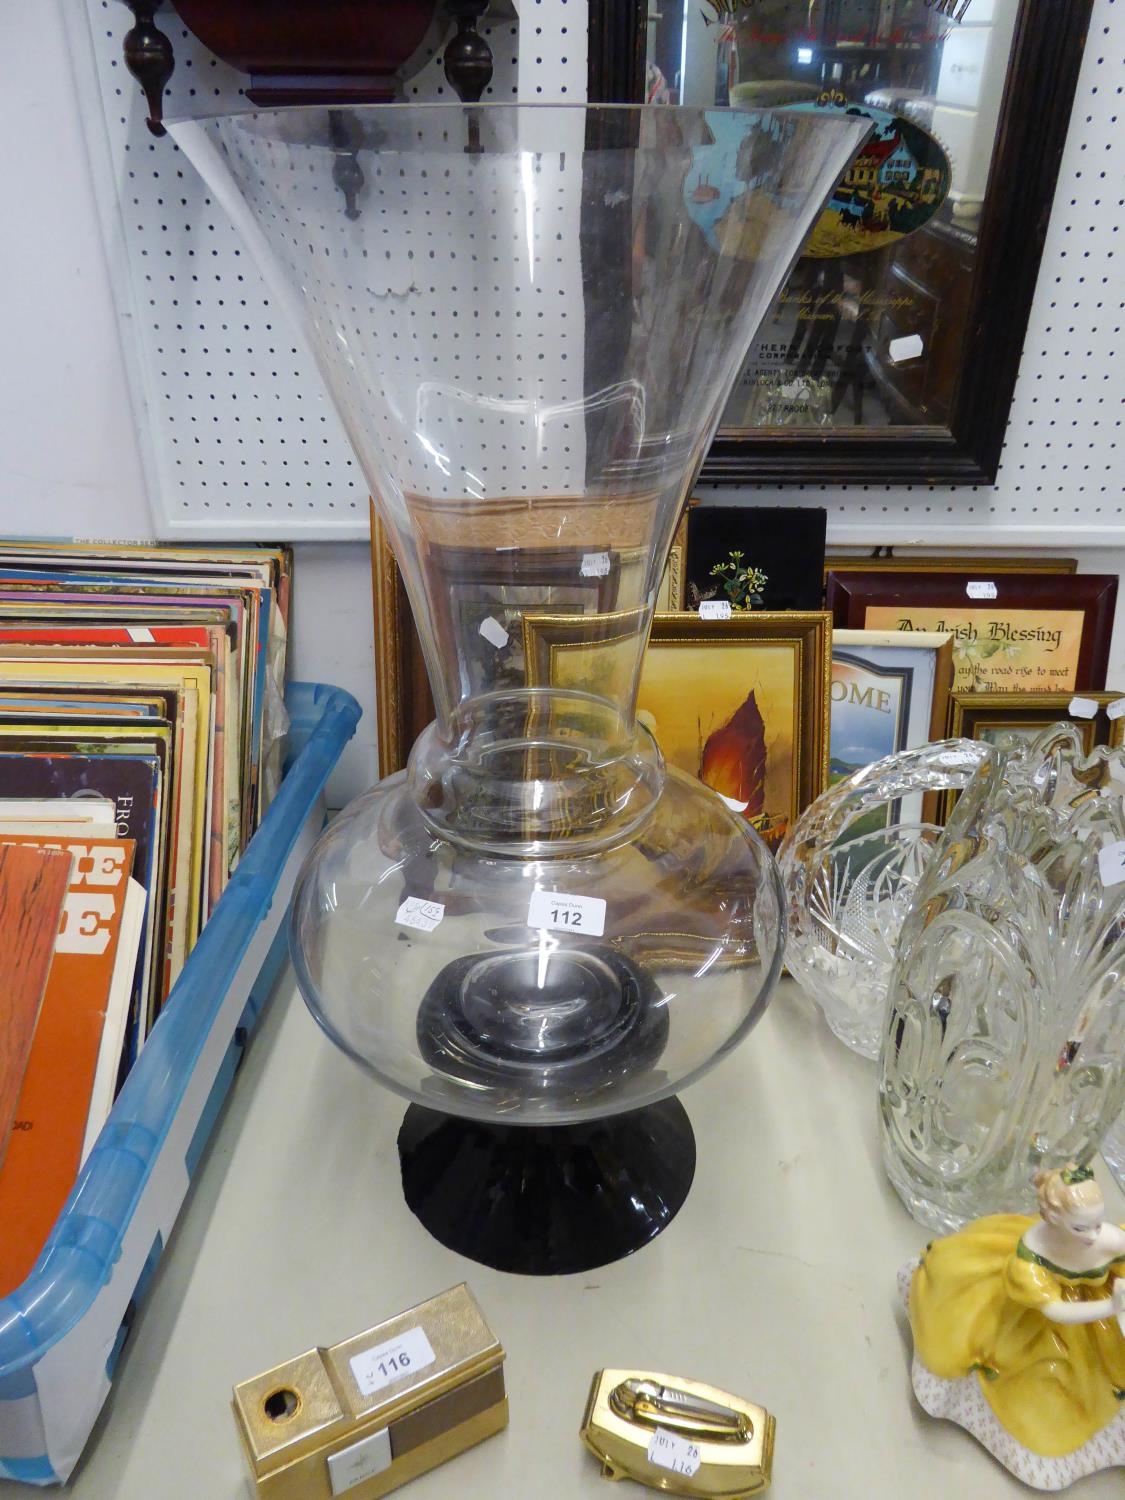 A LARGE FLOOR STANDING OR SHOP DISPLAY GLASS VASE WITH CLEAR THISTLE SHAPE TOP ON INVERTED